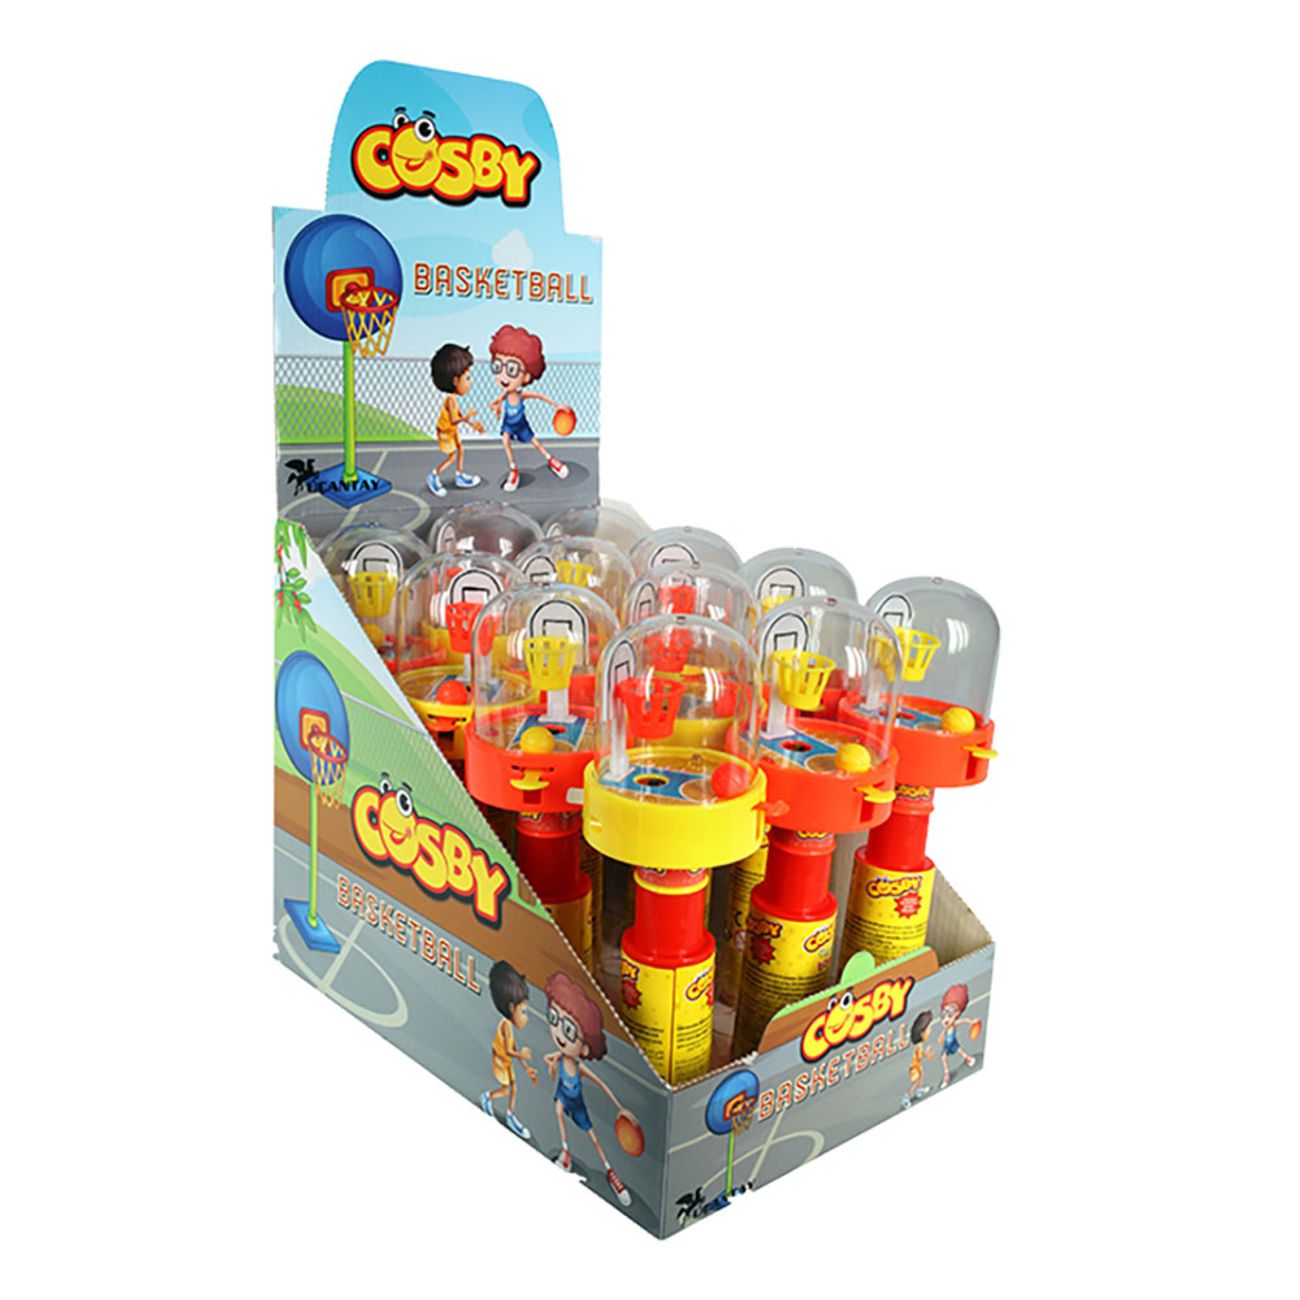 cosby-basketball-toys-80254-2